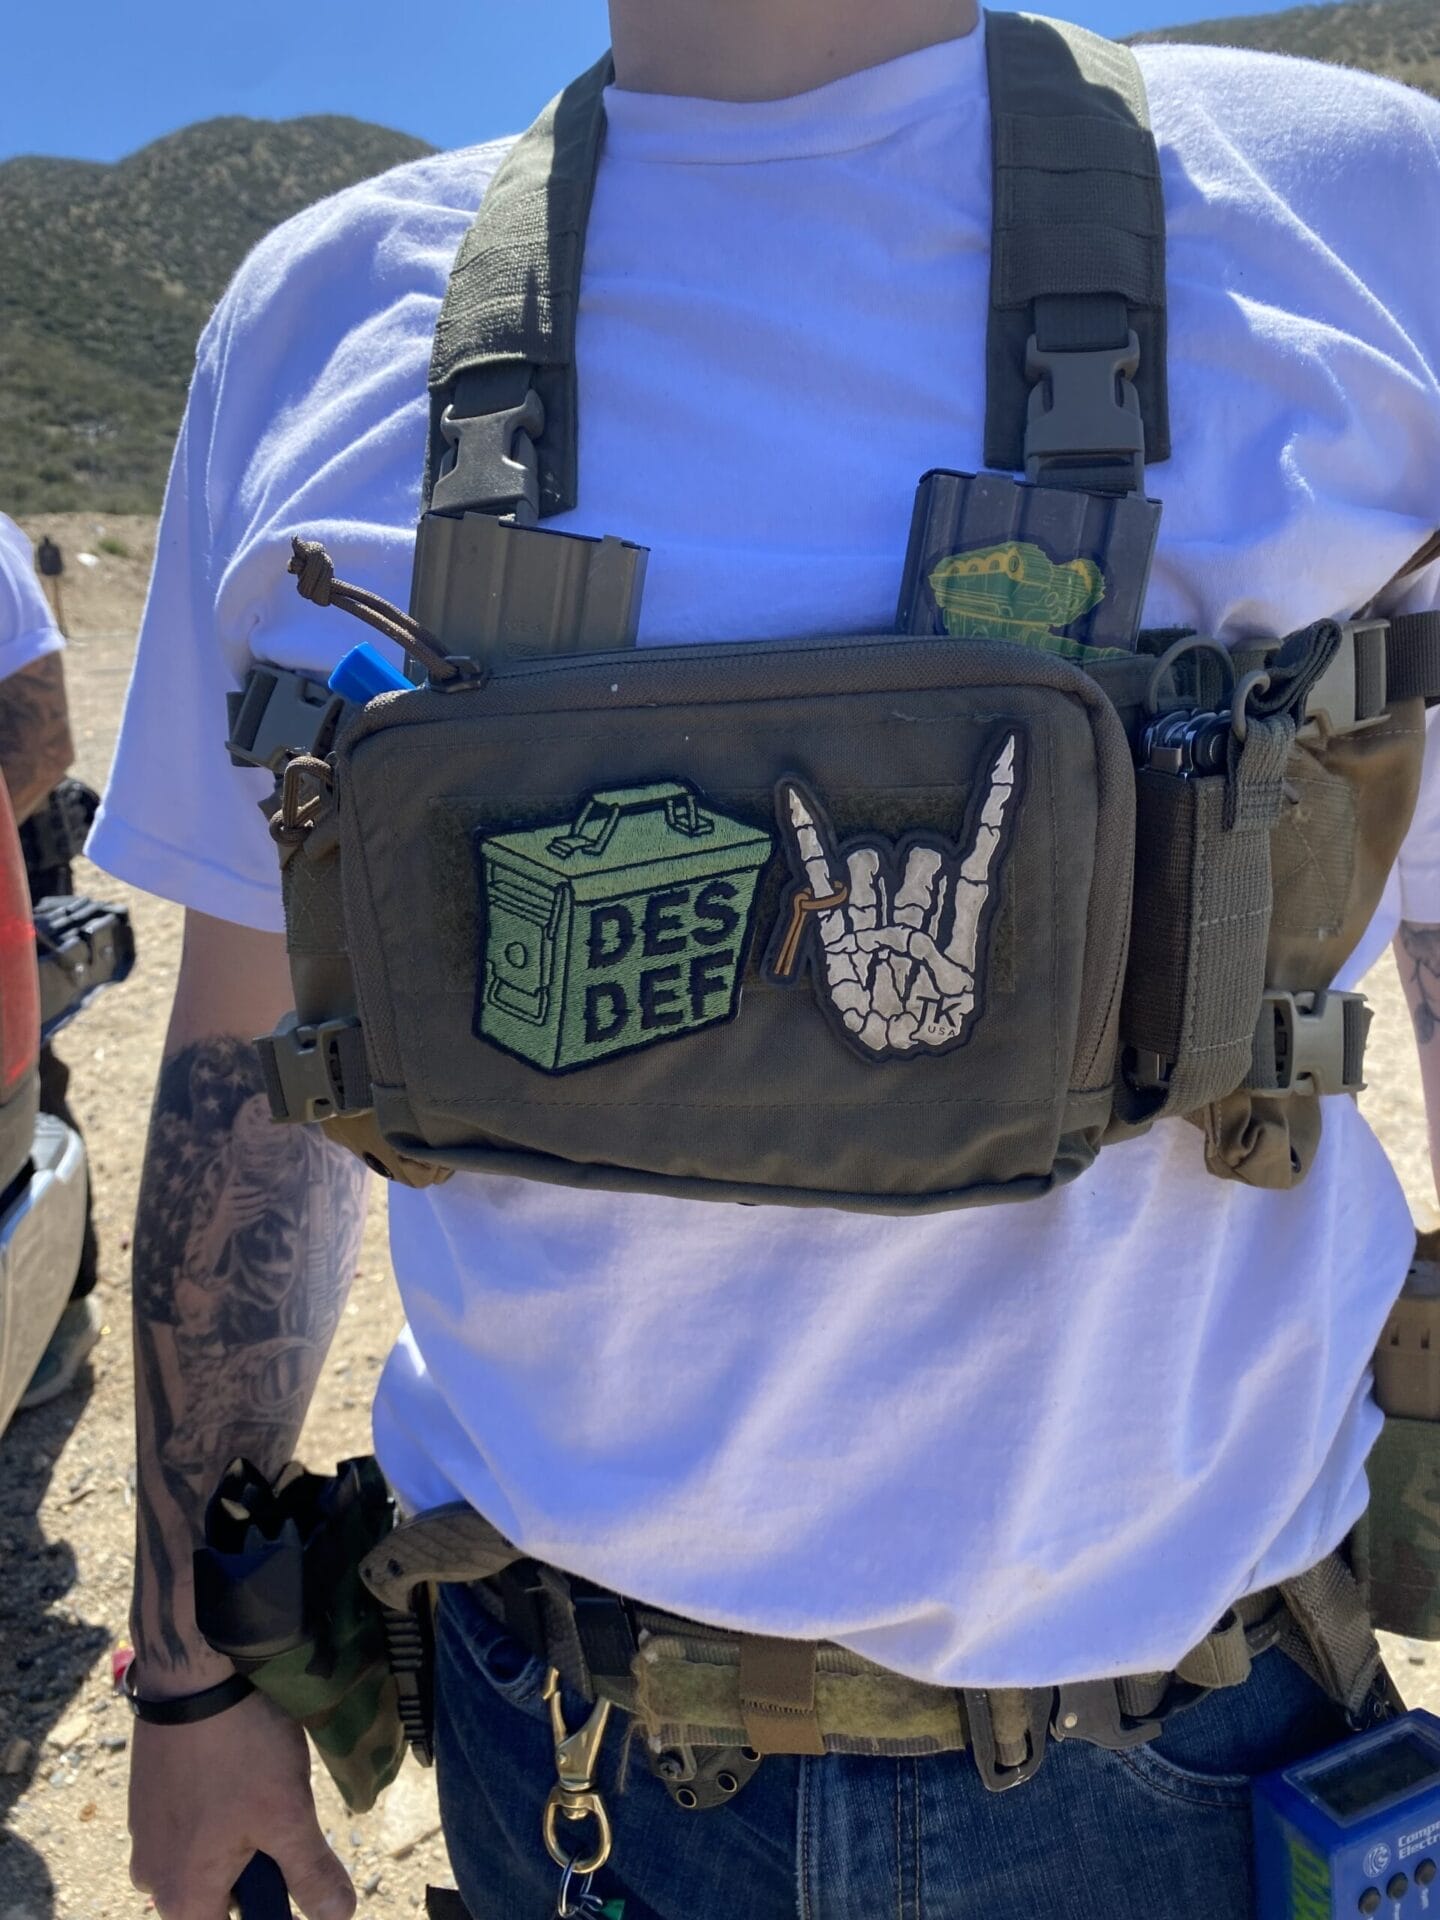 Person wearing a white t-shirt and tactical vest with patches, including one that reads "DES DEF" and another with a rock hand gesture, standing outdoors in a mountainous area.